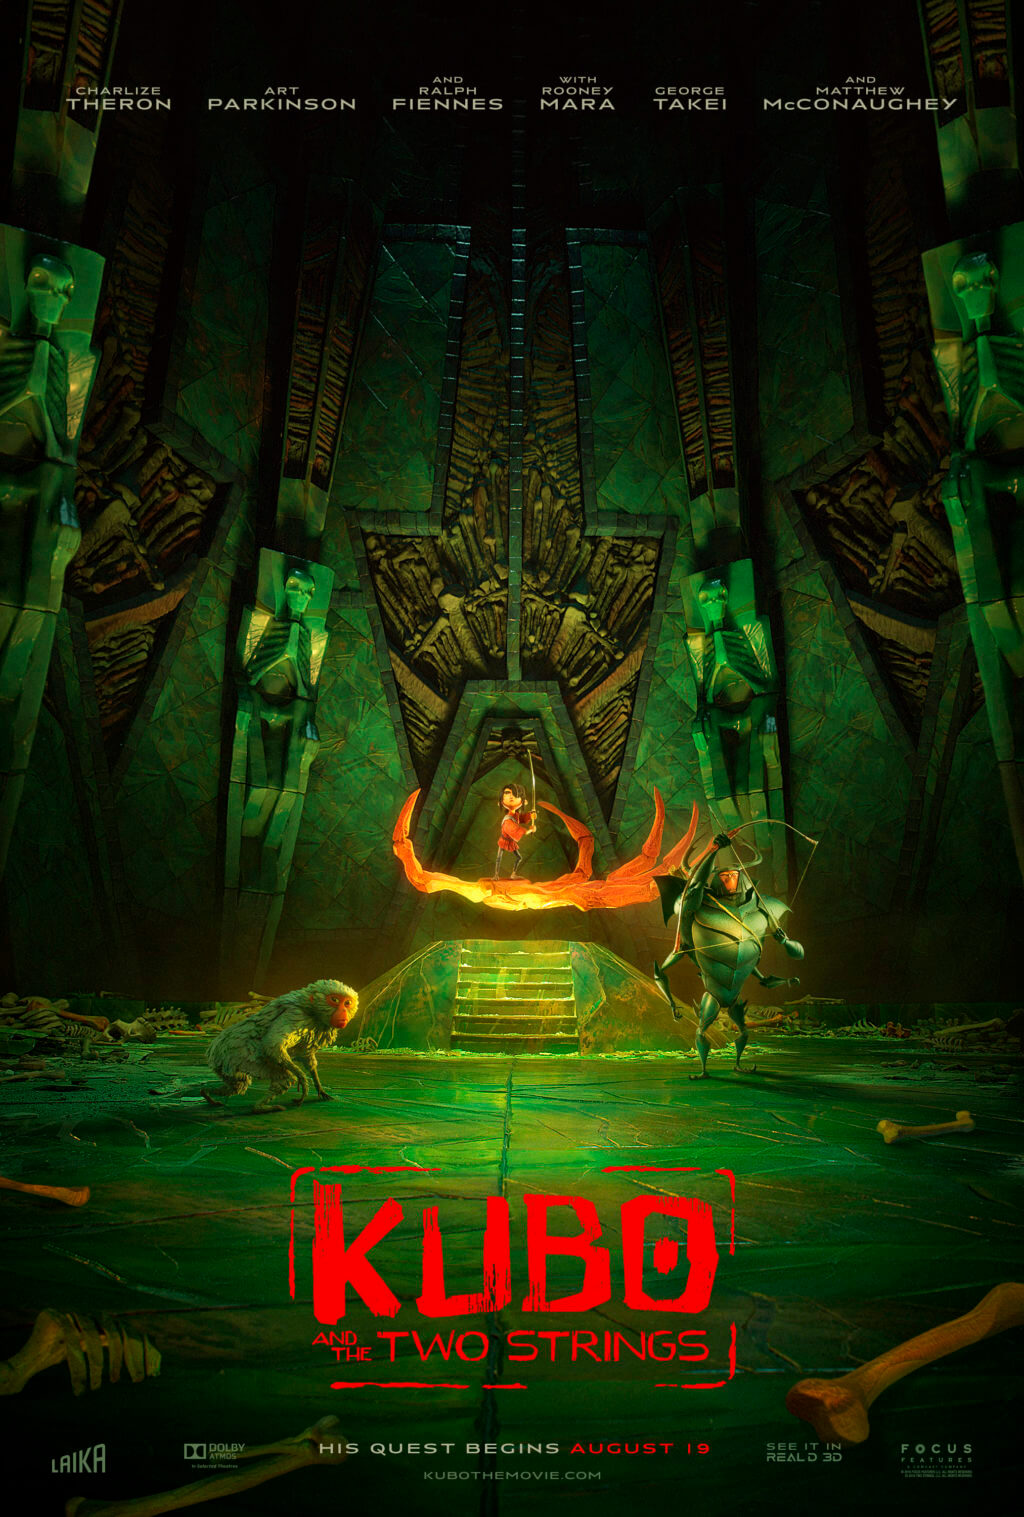 Come see what I thought of the new #movie Kubo and the Two Strings #KuboMovie #ad 